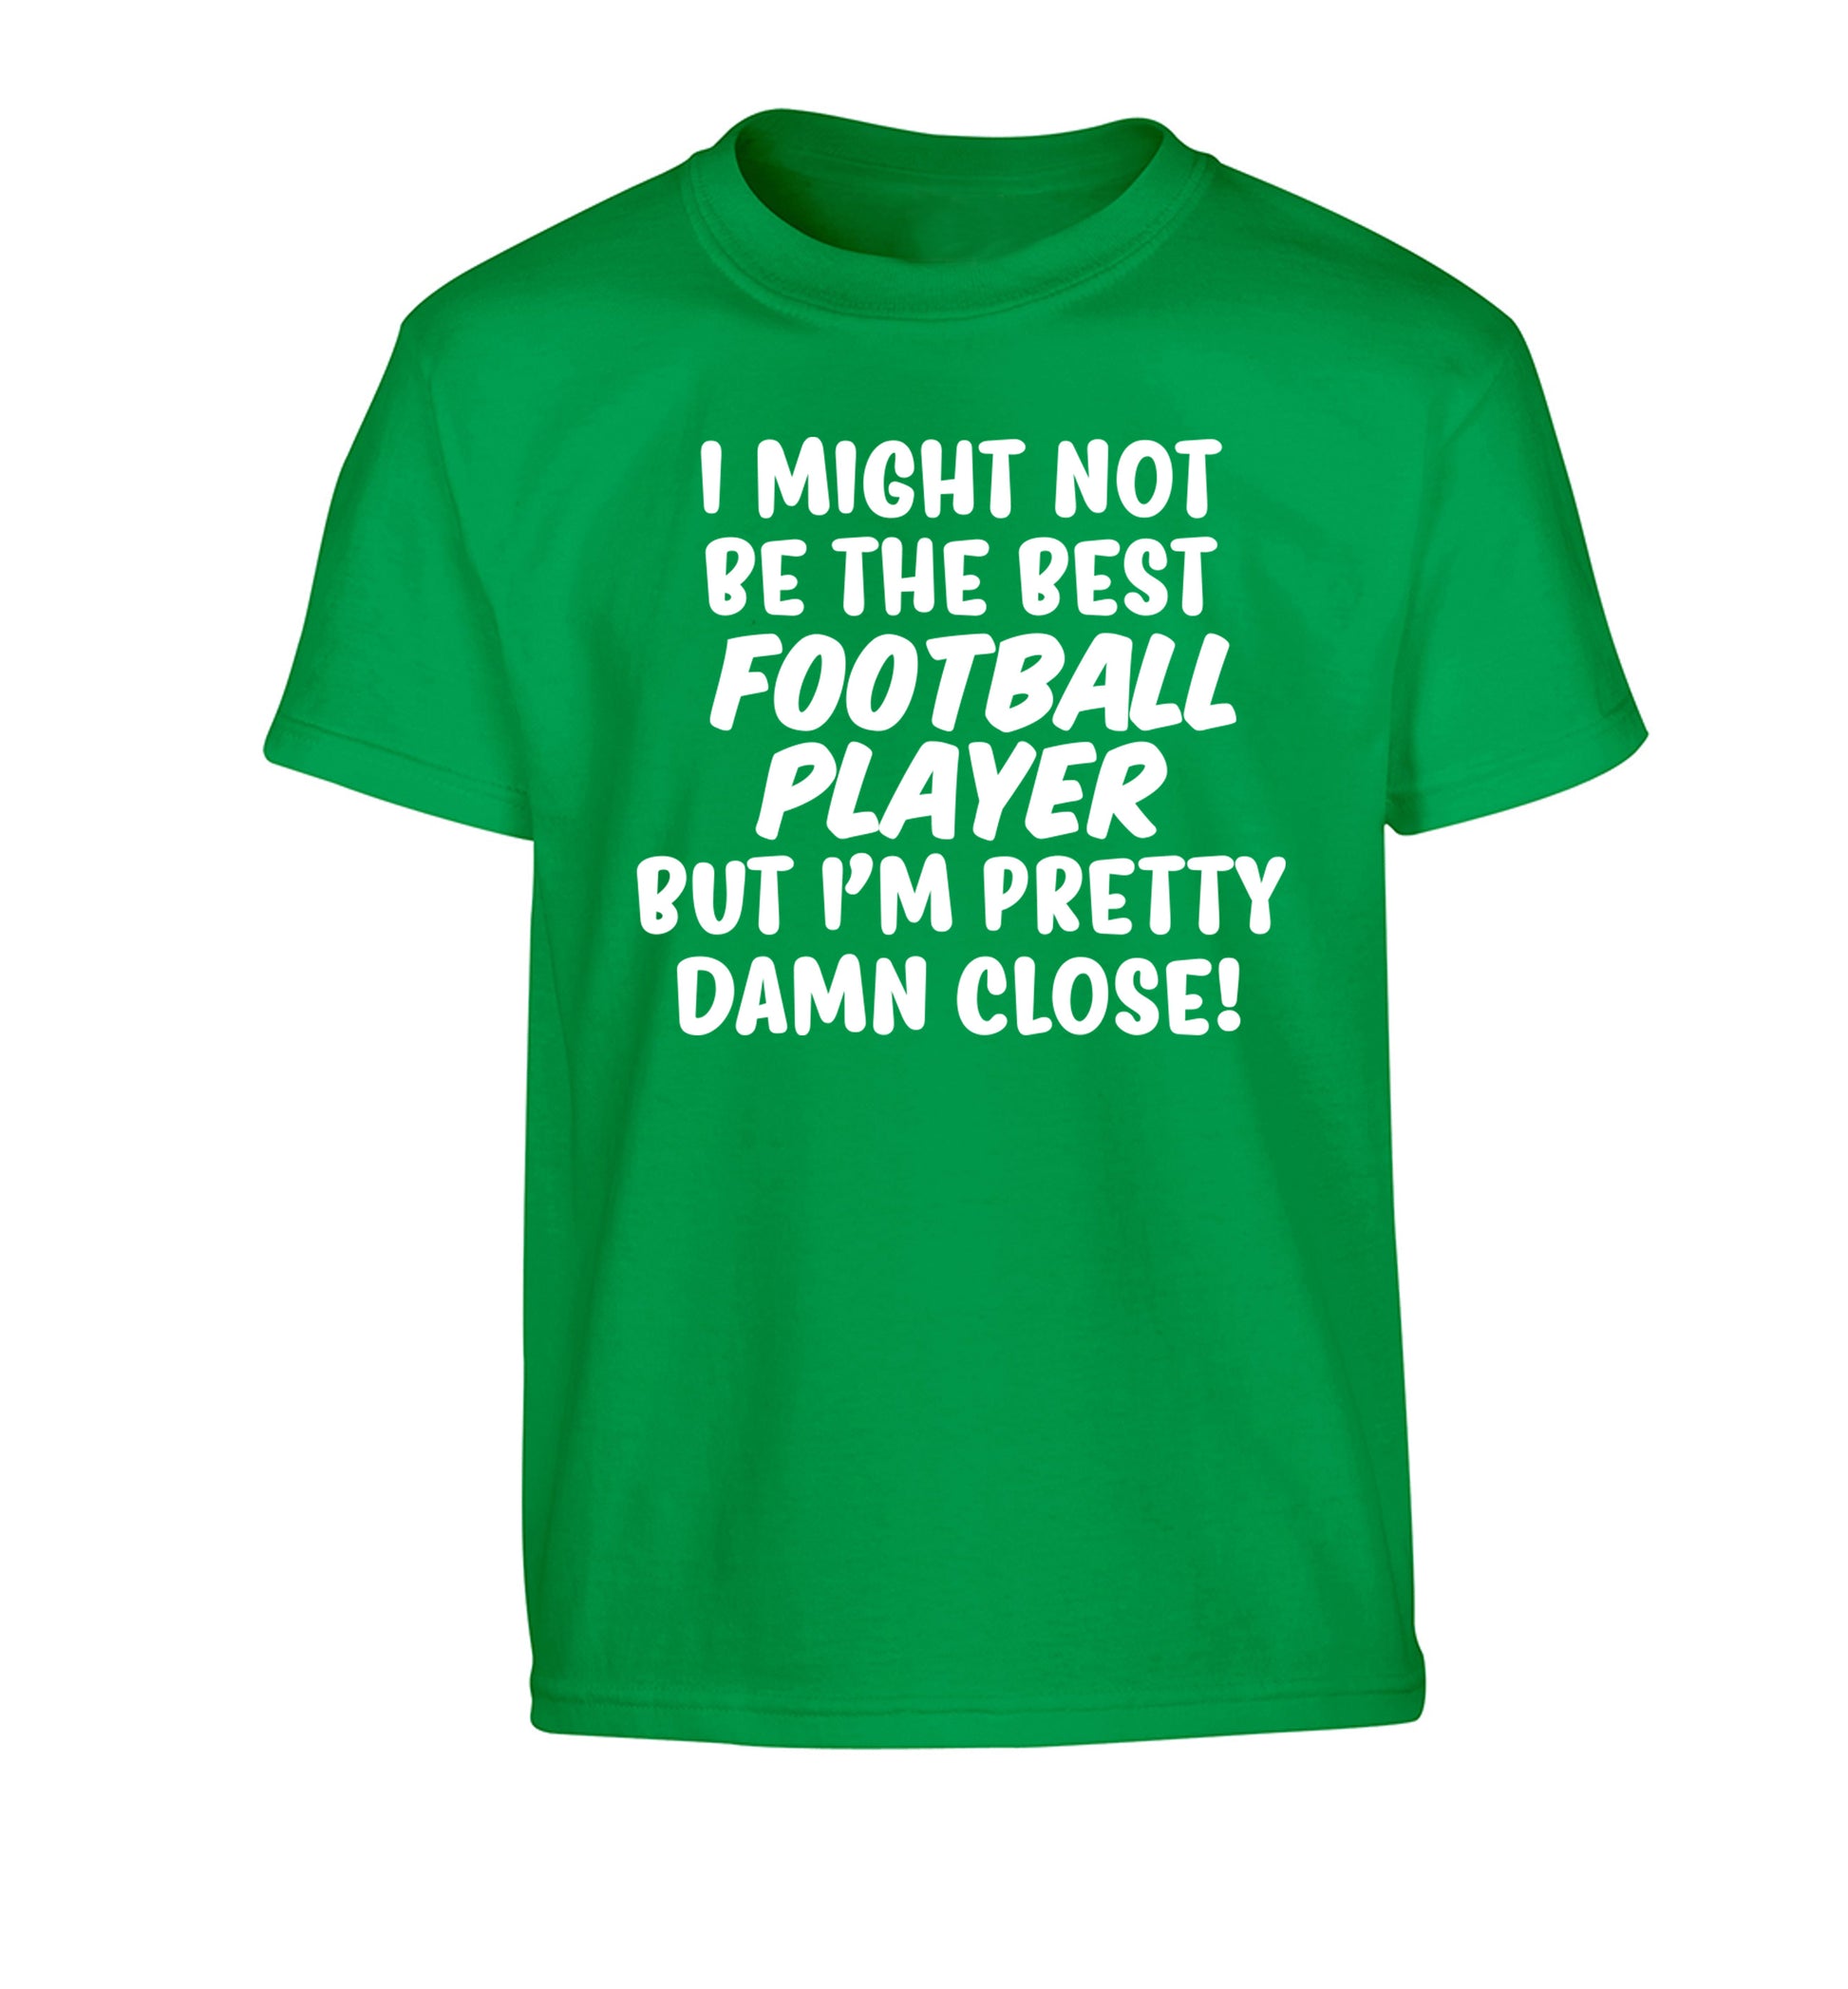 I might not be the best football player but I'm pretty close! Children's green Tshirt 12-14 Years